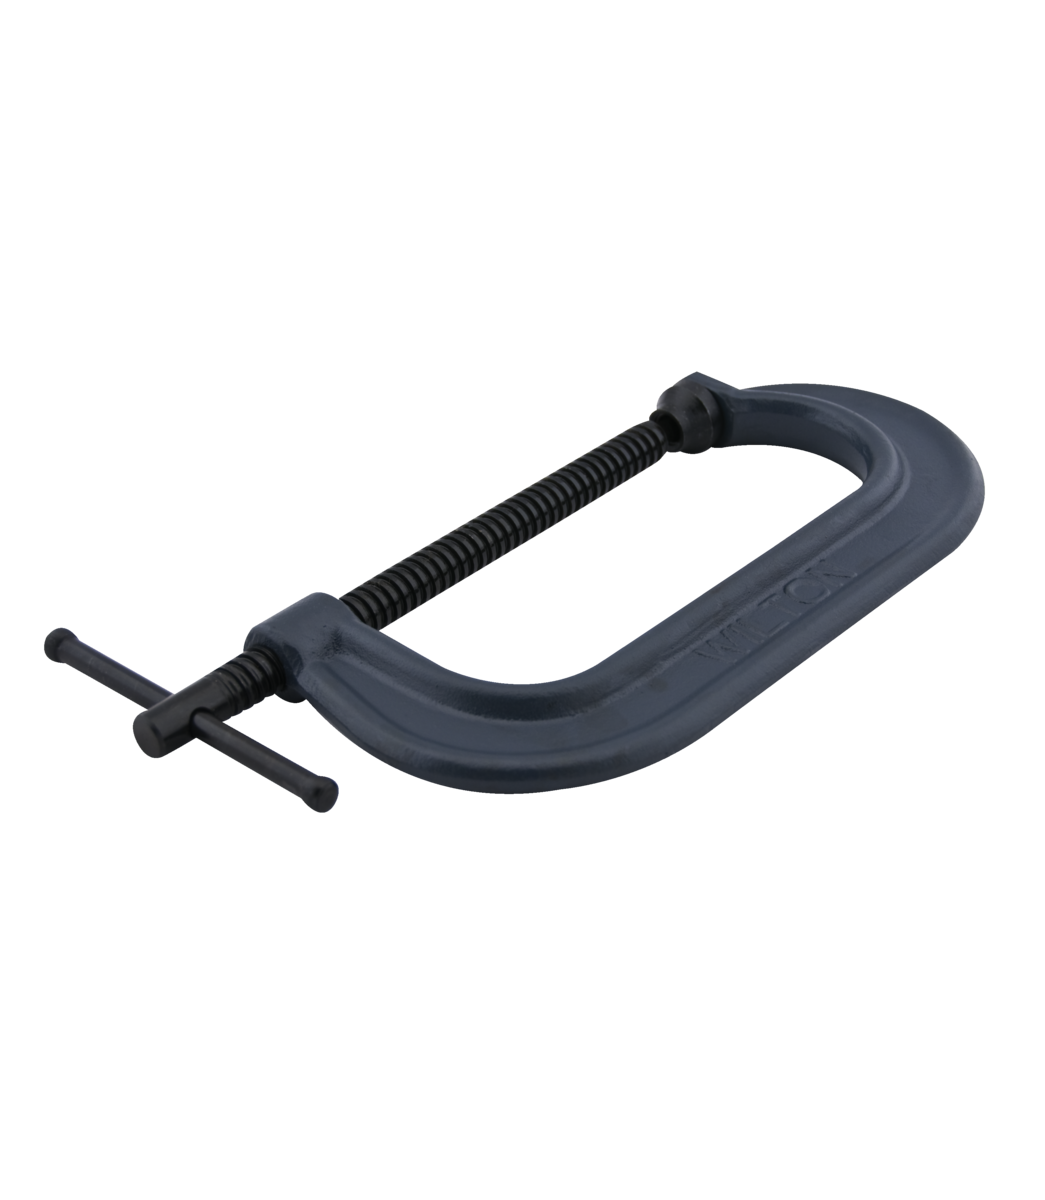 WILTON 800 Series Standard Depth Drop Forged C-Clamp, 1-1/2 -10” Opening, 3-3/4” Throat